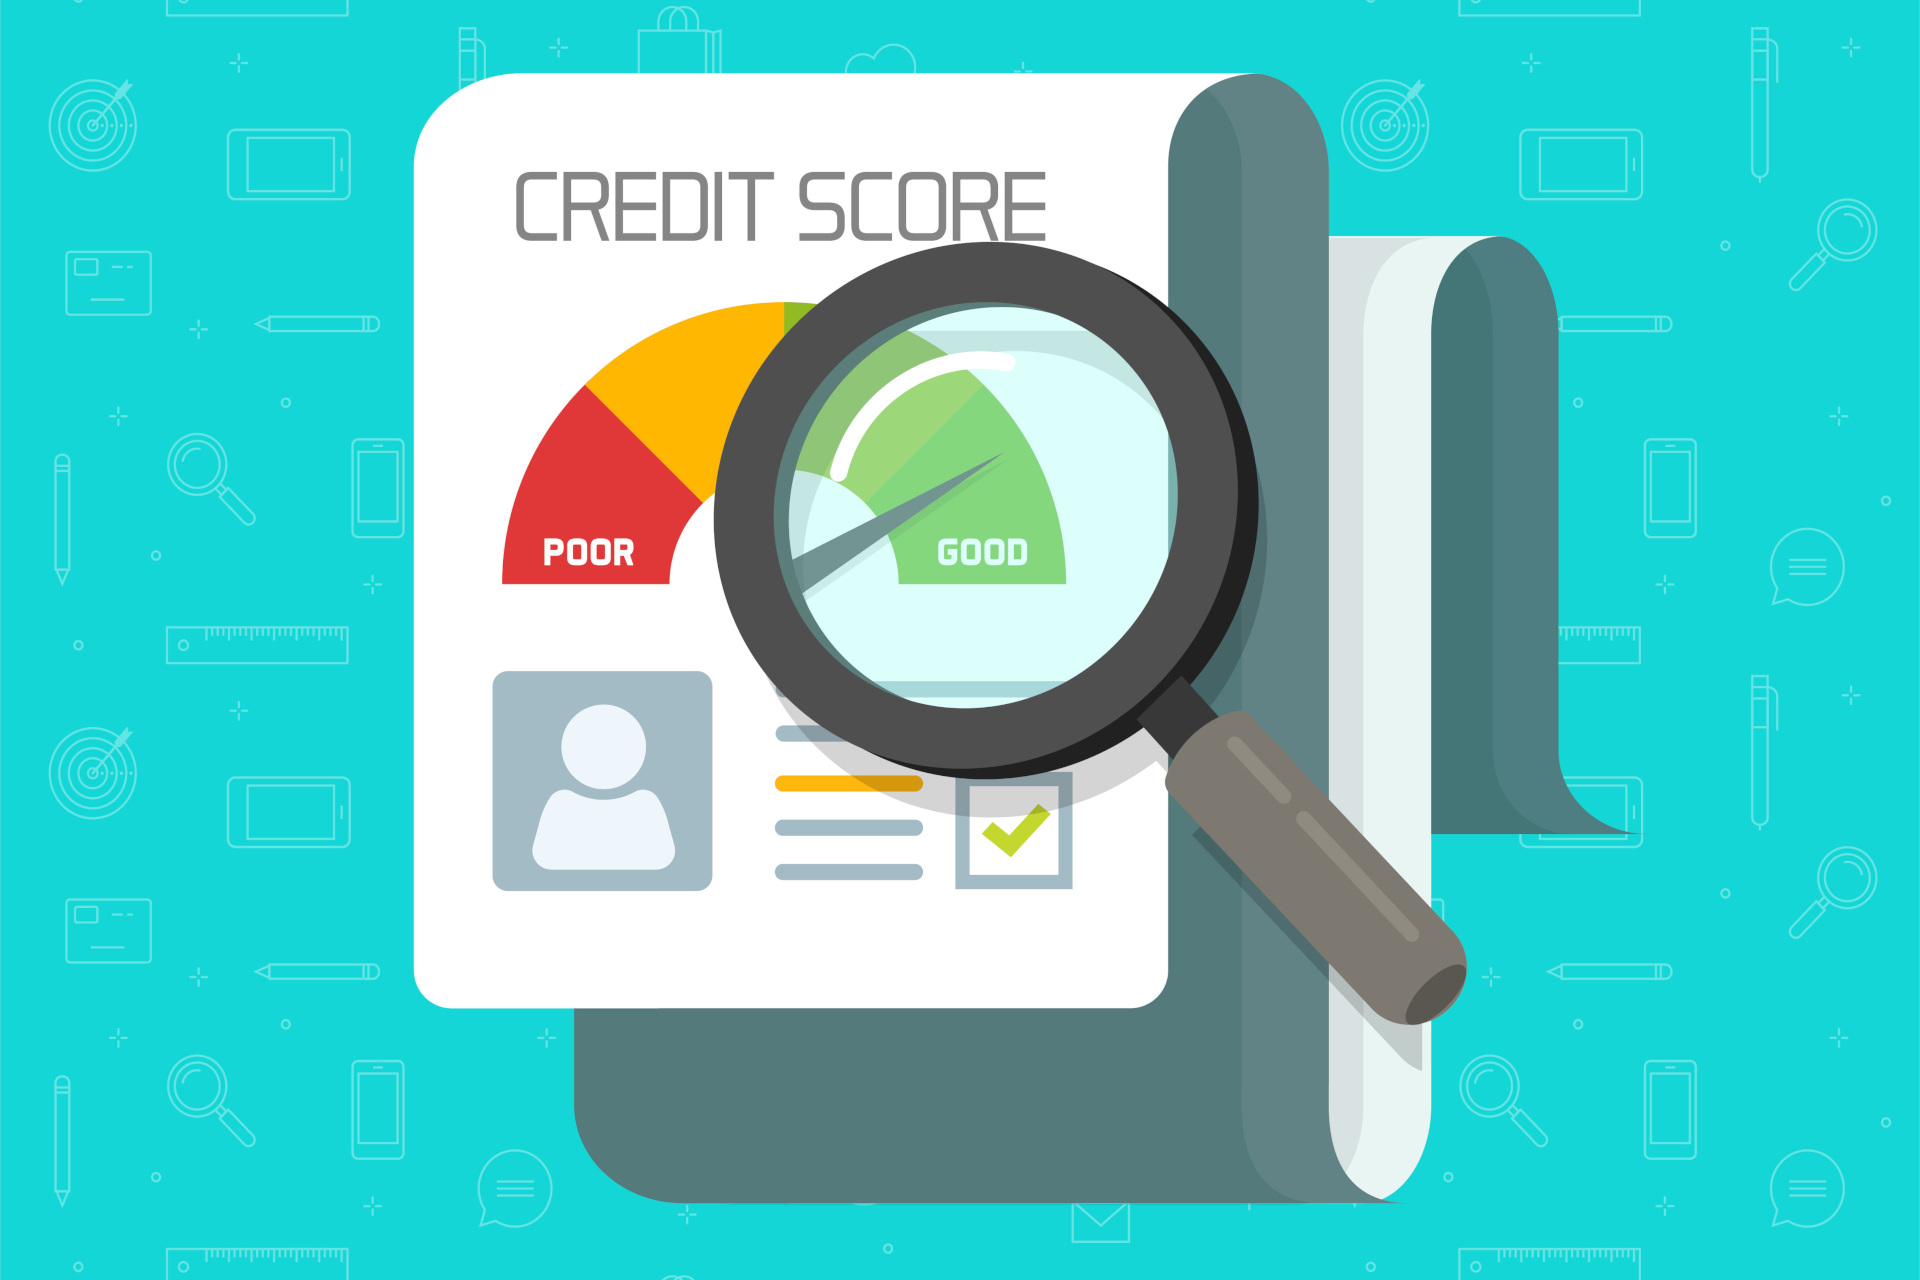 How to improve your bad credit score?